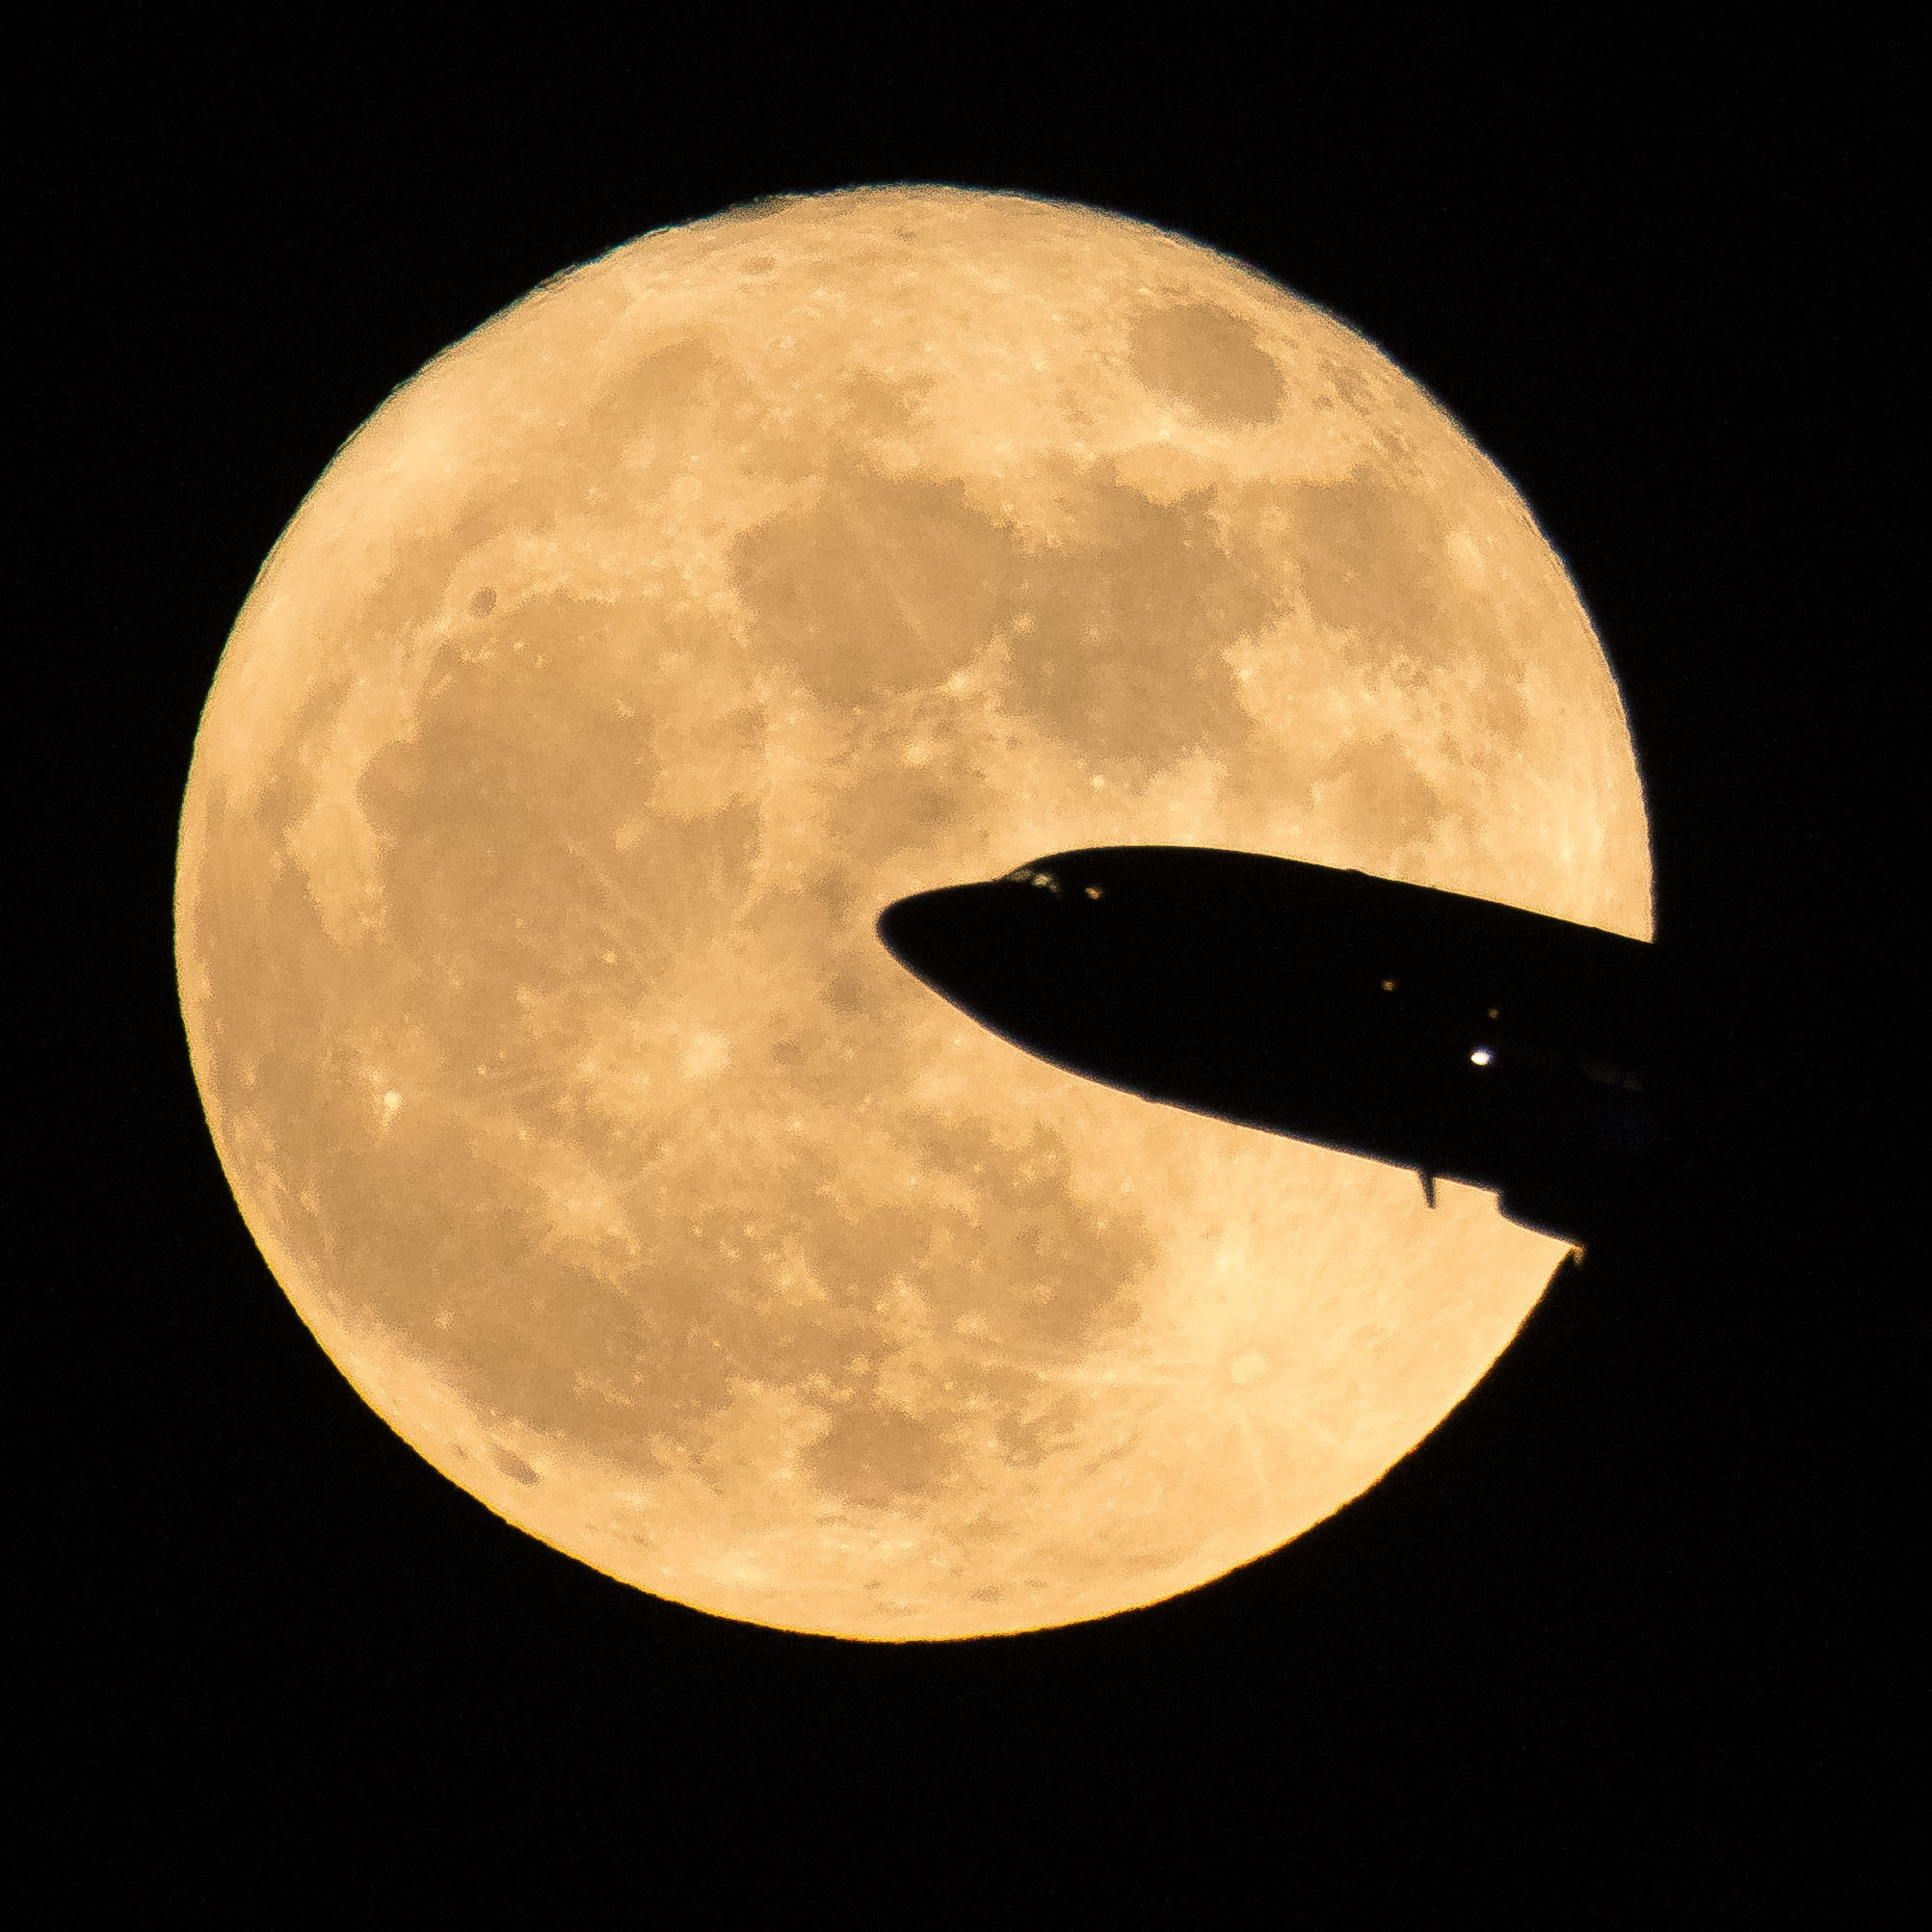 An airline flies across the face of the Moon in this forced perspective image that makes the airplane seen big and the Moon seem small.